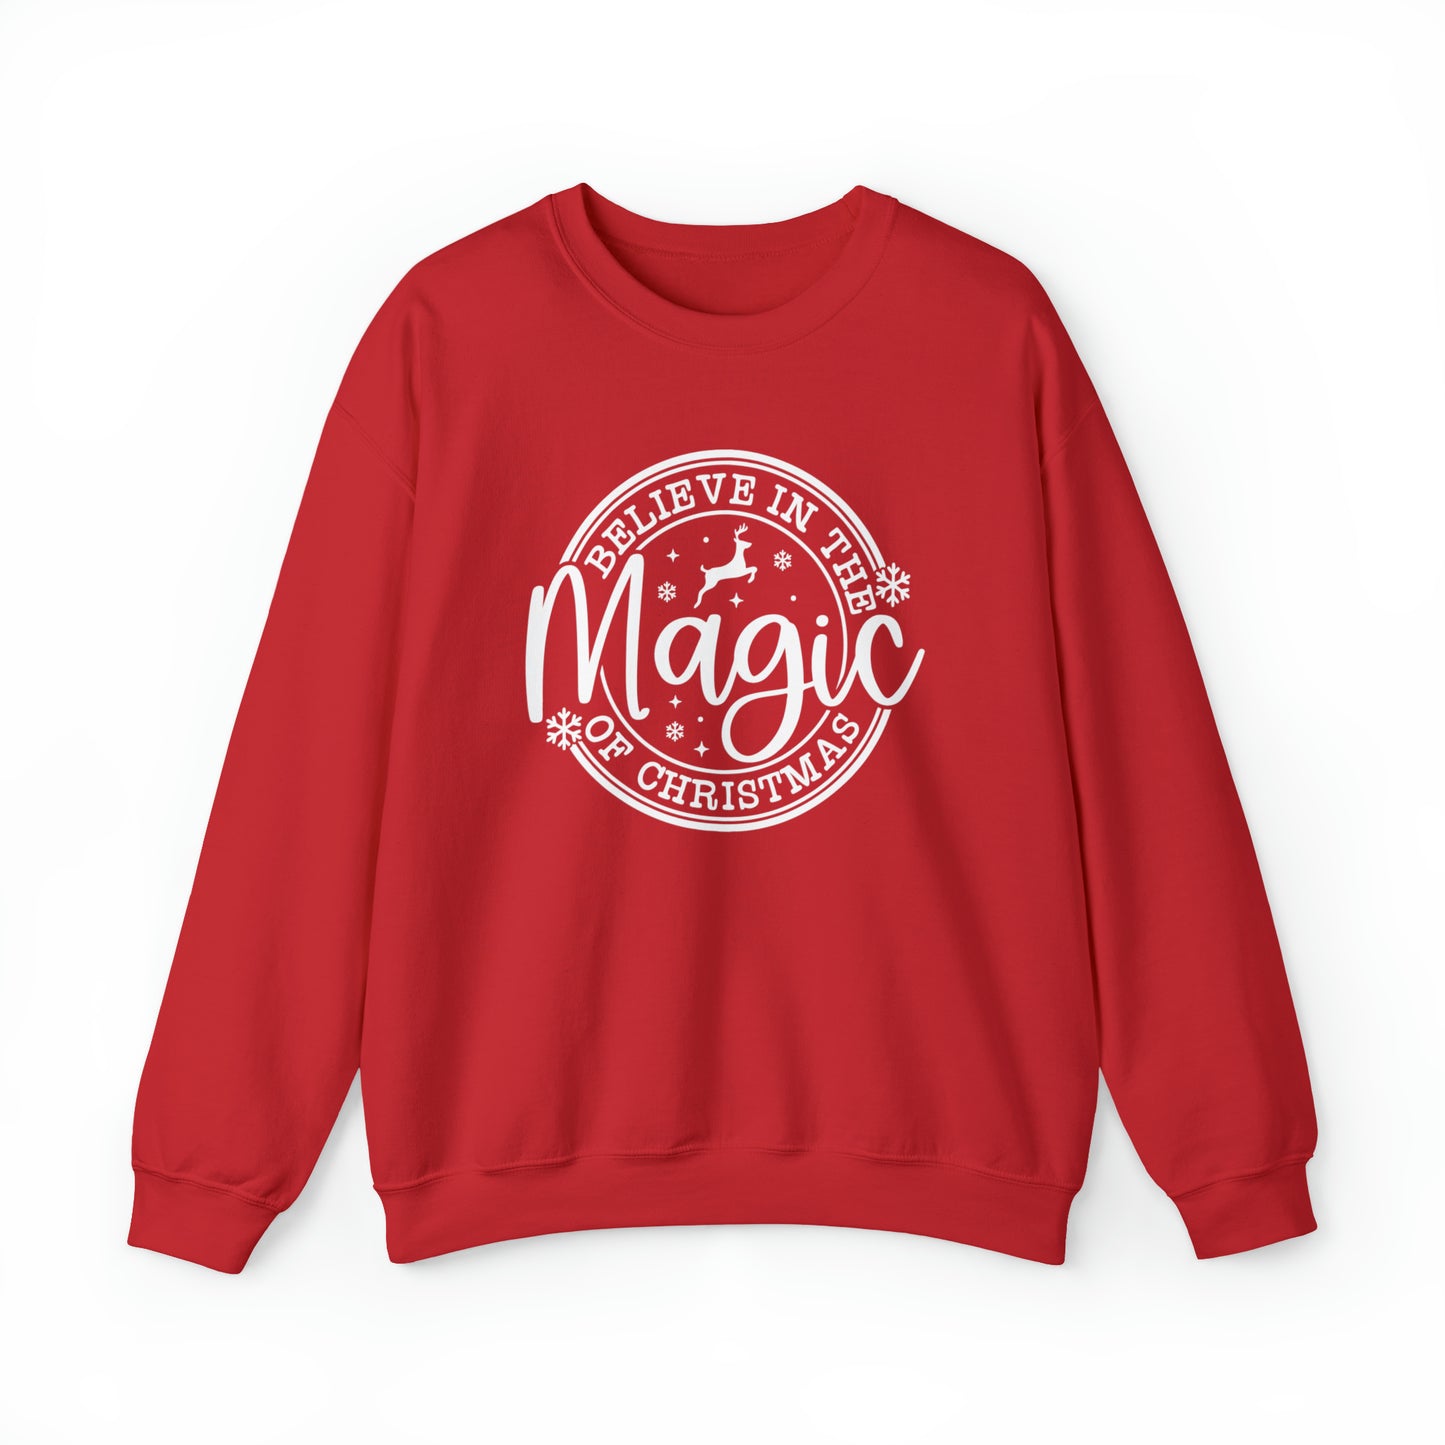 Believe in the Magic of Christmas Crewneck Sweater